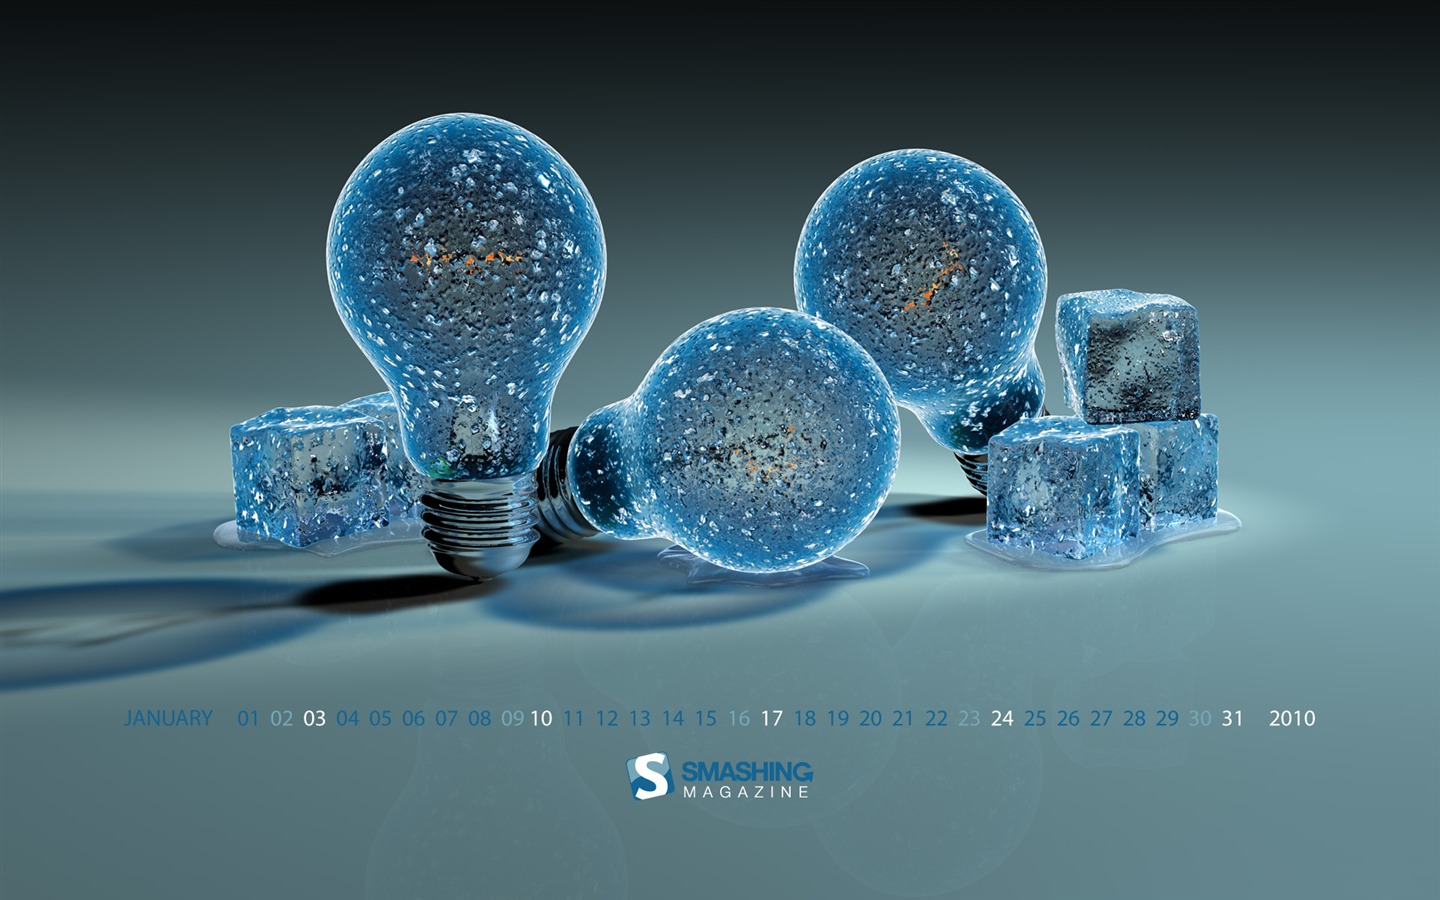 Microsoft Official Win7 New Year Wallpapers #6 - 1440x900